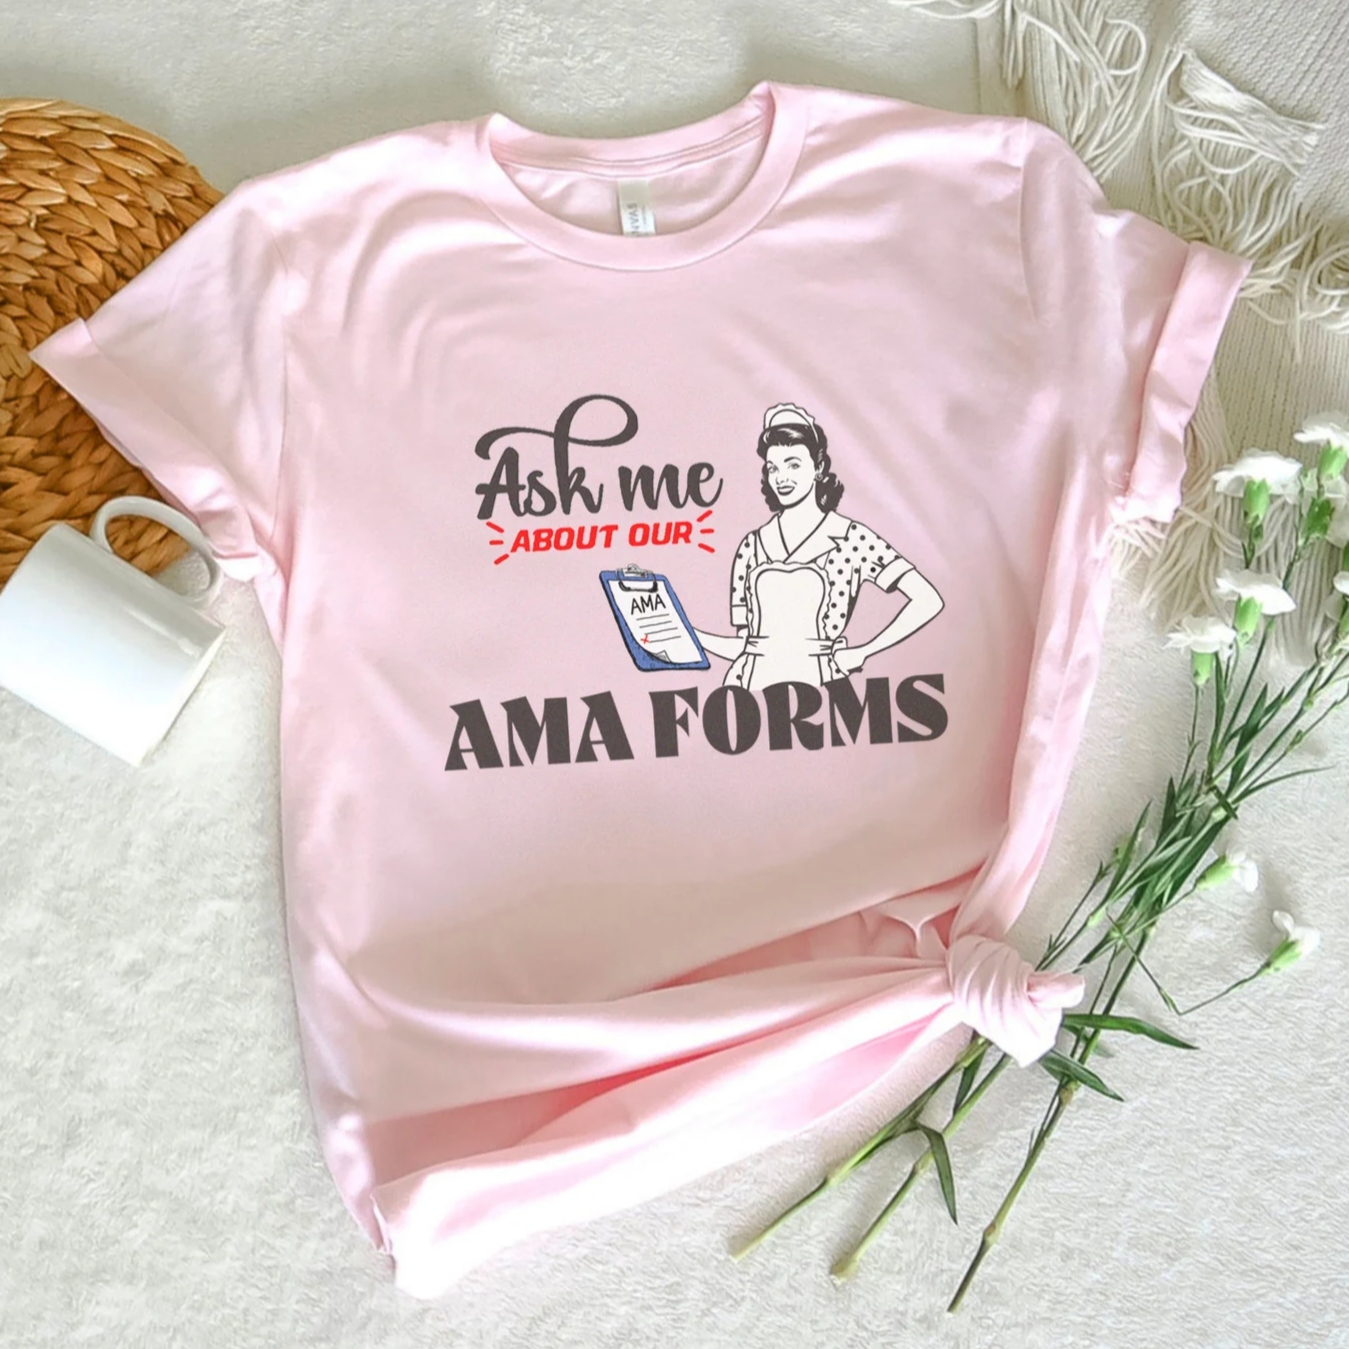 Ask Me About Our AMA Forms Retro T-Shirt